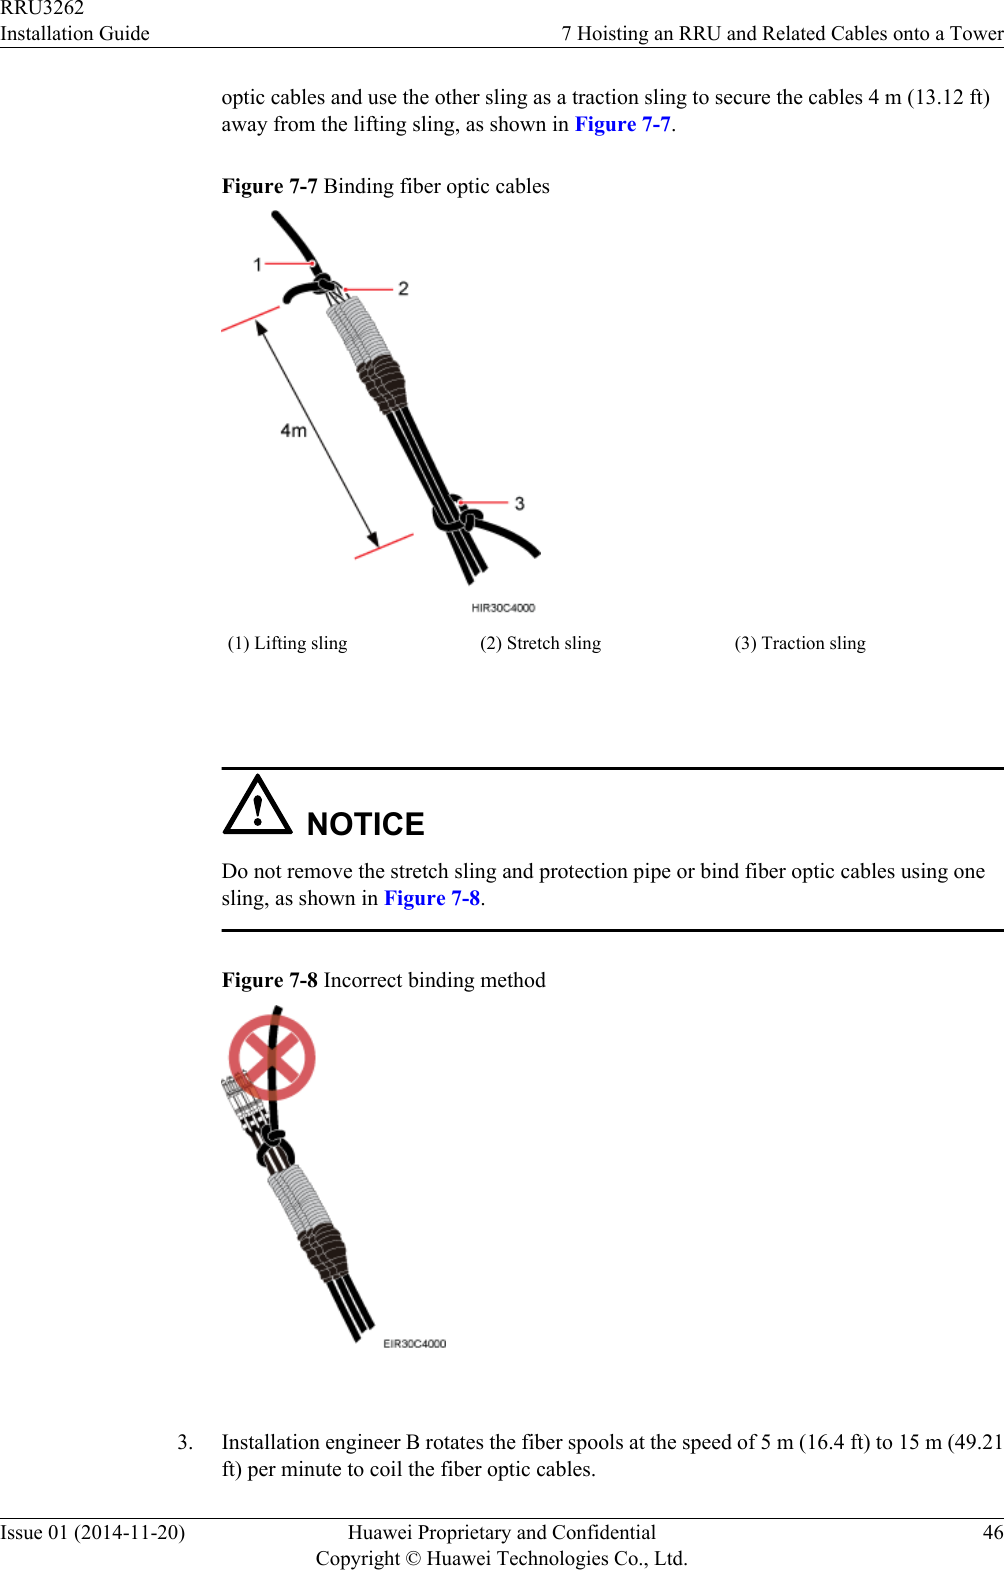 optic cables and use the other sling as a traction sling to secure the cables 4 m (13.12 ft)away from the lifting sling, as shown in Figure 7-7.Figure 7-7 Binding fiber optic cables(1) Lifting sling (2) Stretch sling (3) Traction sling NOTICEDo not remove the stretch sling and protection pipe or bind fiber optic cables using onesling, as shown in Figure 7-8.Figure 7-8 Incorrect binding method 3. Installation engineer B rotates the fiber spools at the speed of 5 m (16.4 ft) to 15 m (49.21ft) per minute to coil the fiber optic cables.RRU3262Installation Guide 7 Hoisting an RRU and Related Cables onto a TowerIssue 01 (2014-11-20) Huawei Proprietary and ConfidentialCopyright © Huawei Technologies Co., Ltd.46